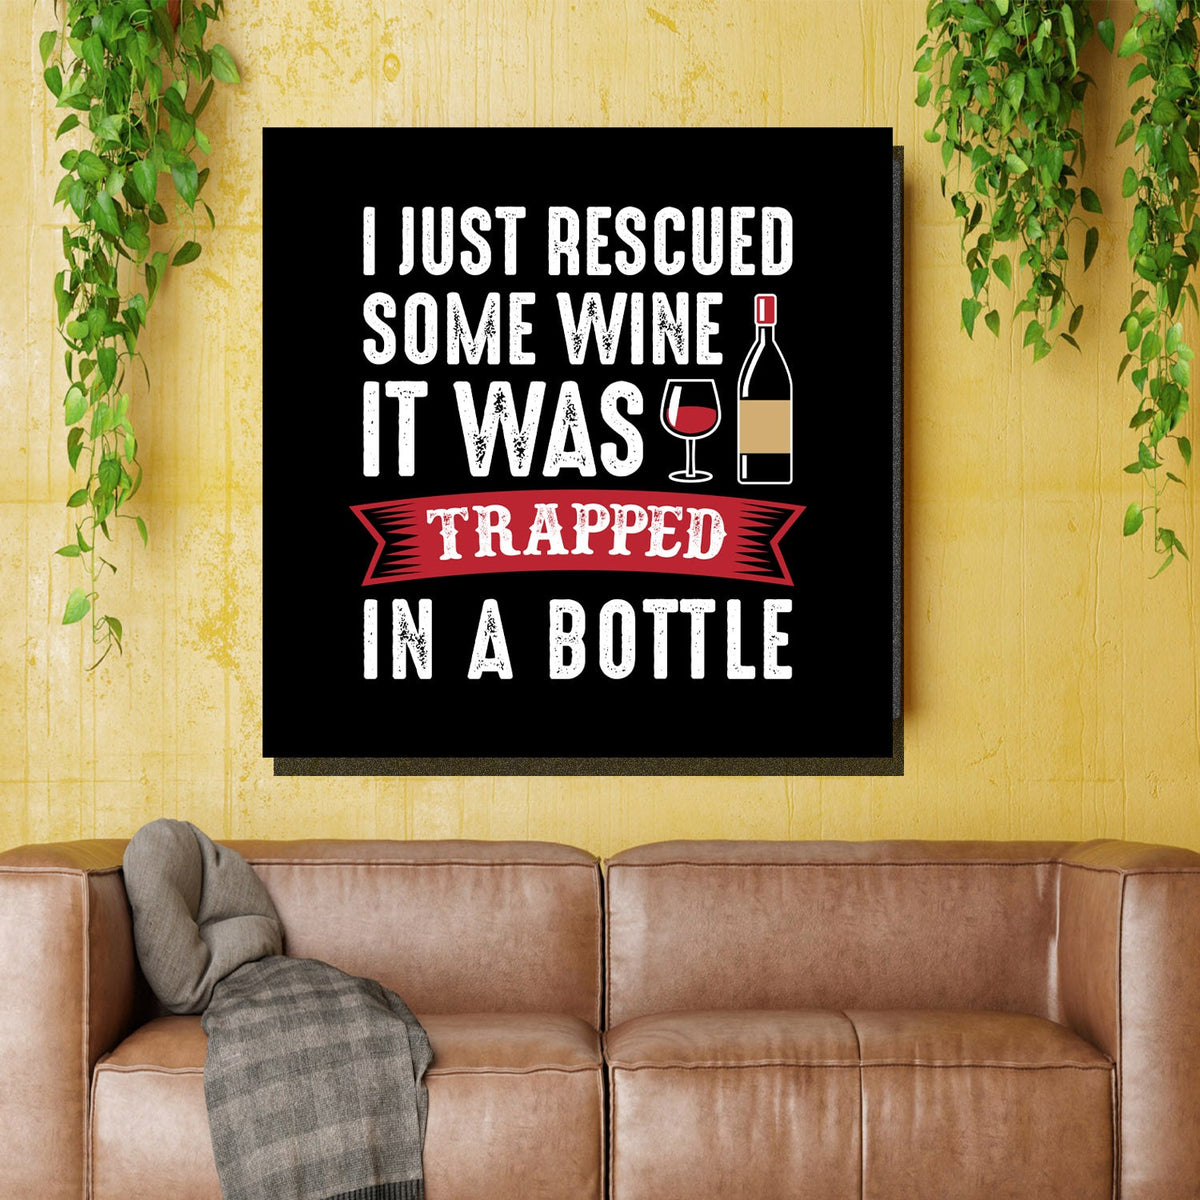 https://cdn.shopify.com/s/files/1/0387/9986/8044/products/WineRescueCanvasArtprintStretched-4.jpg